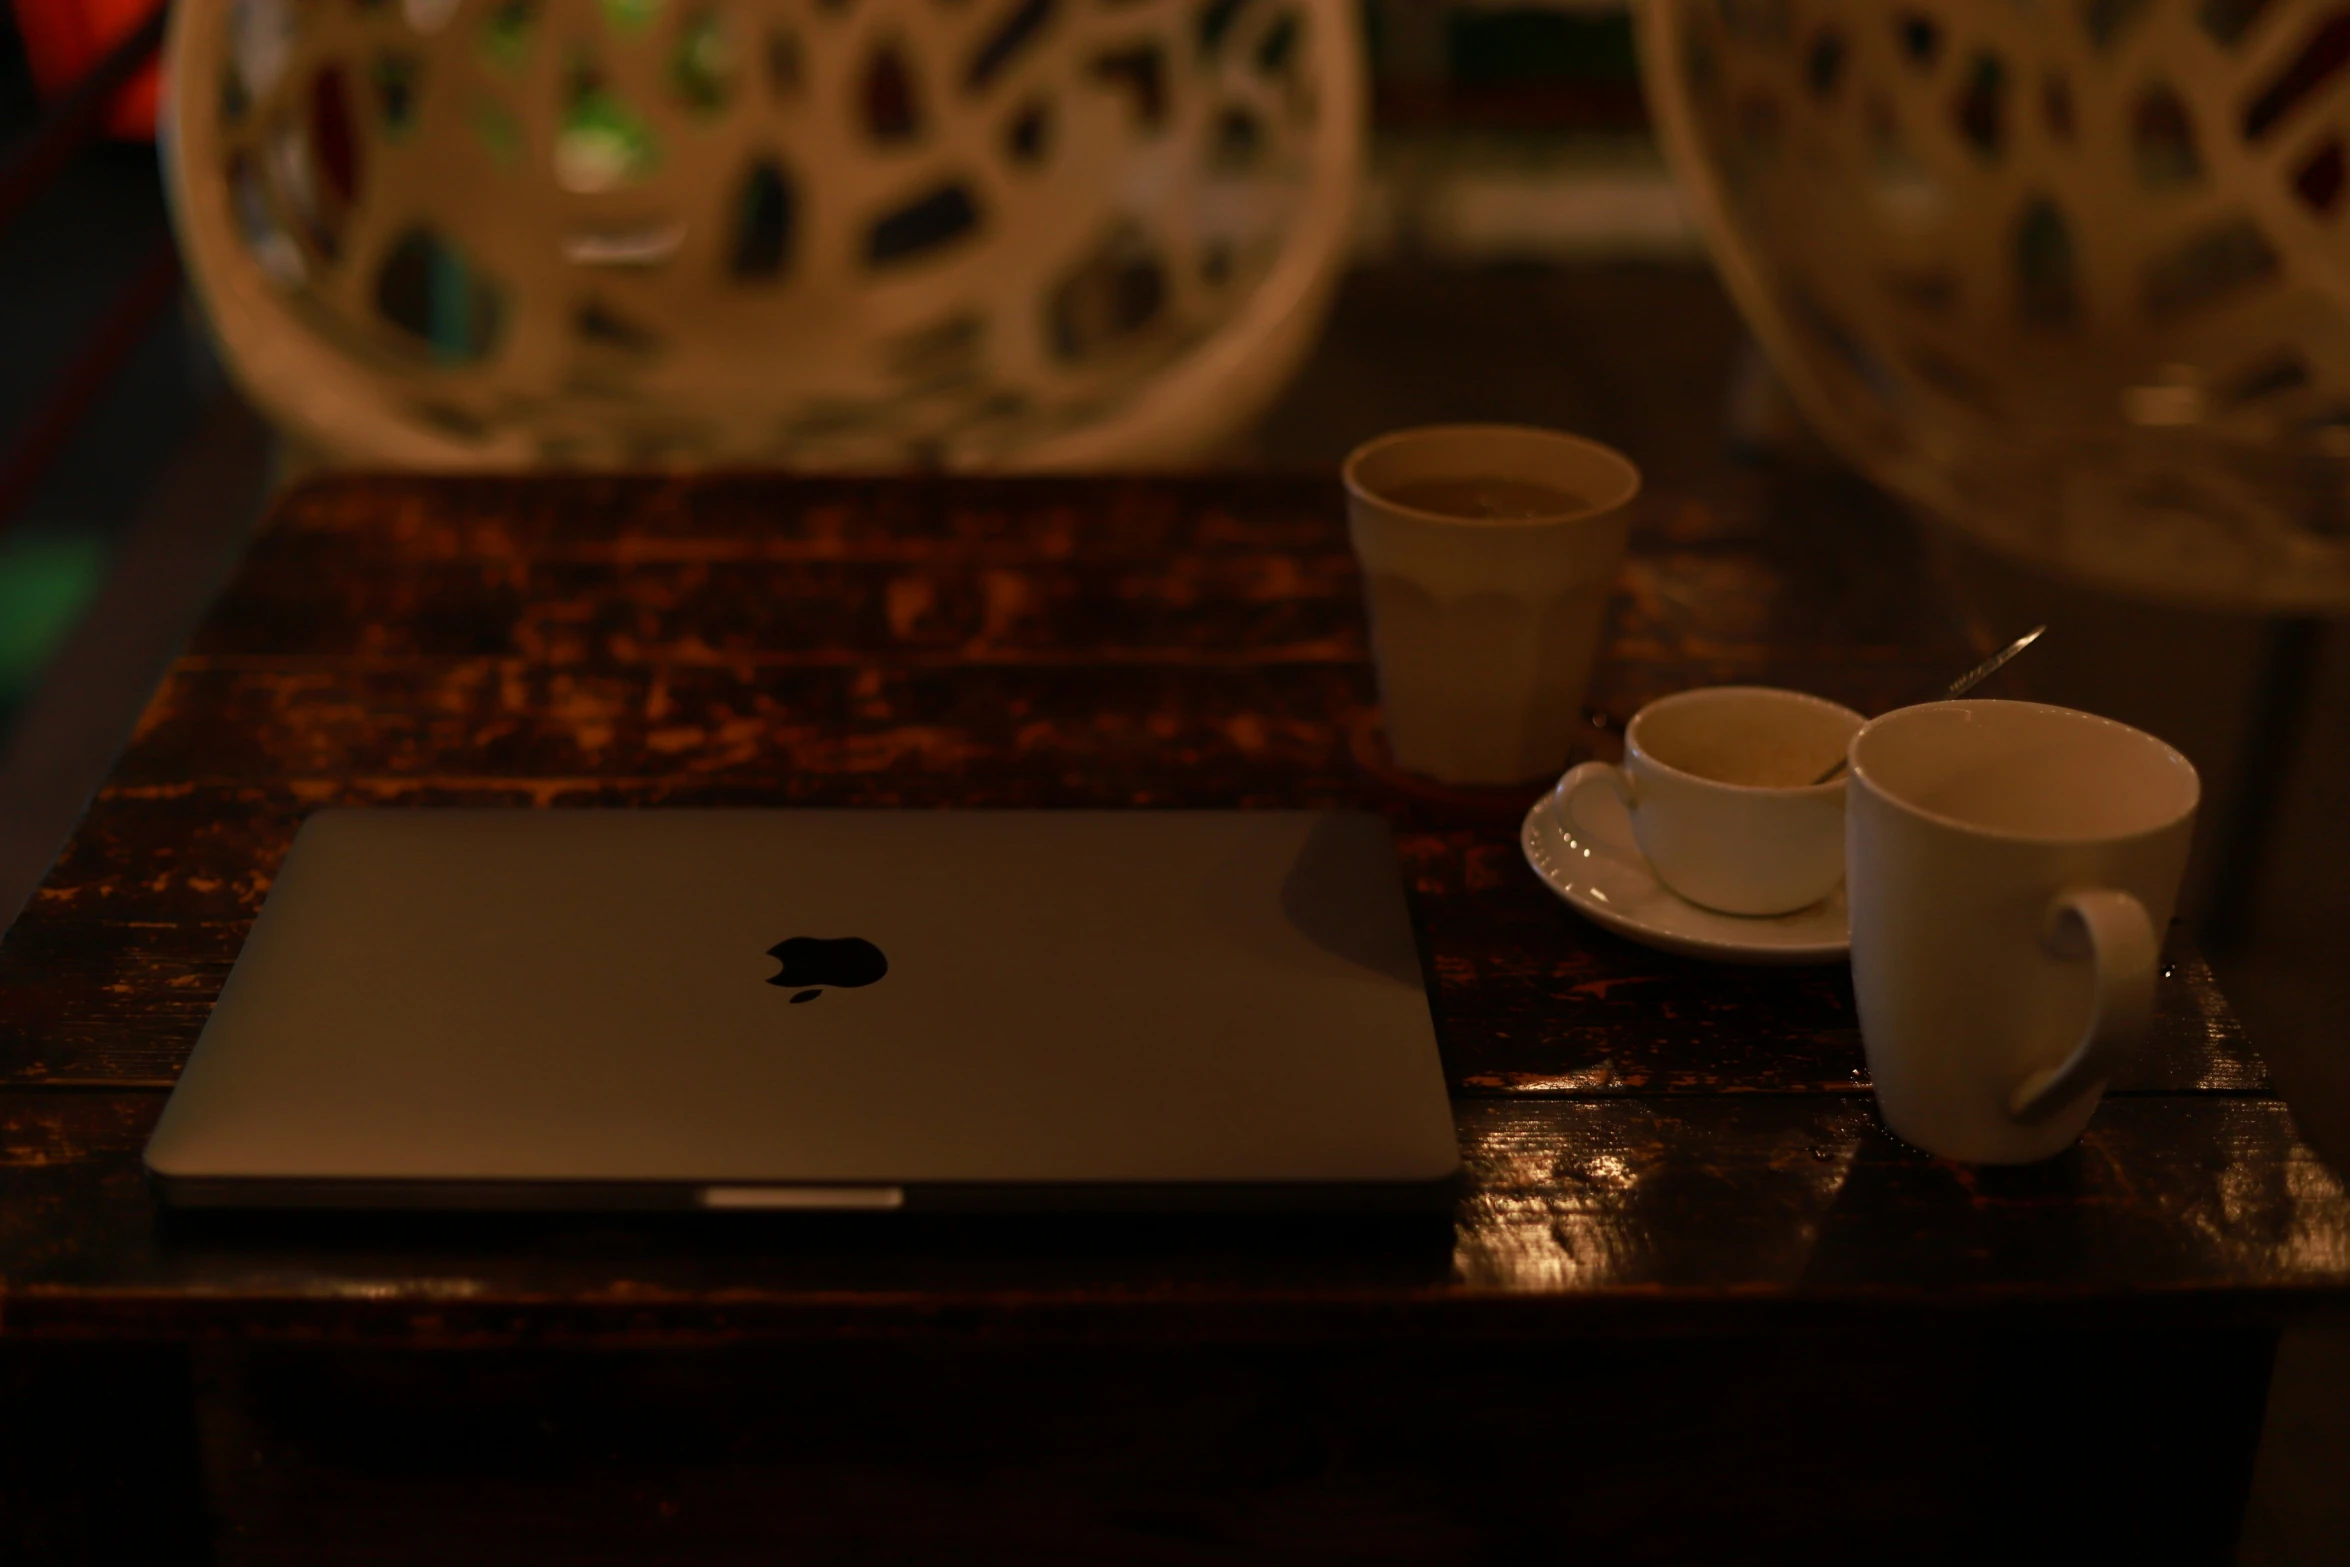 a laptop and cups on a table with lights